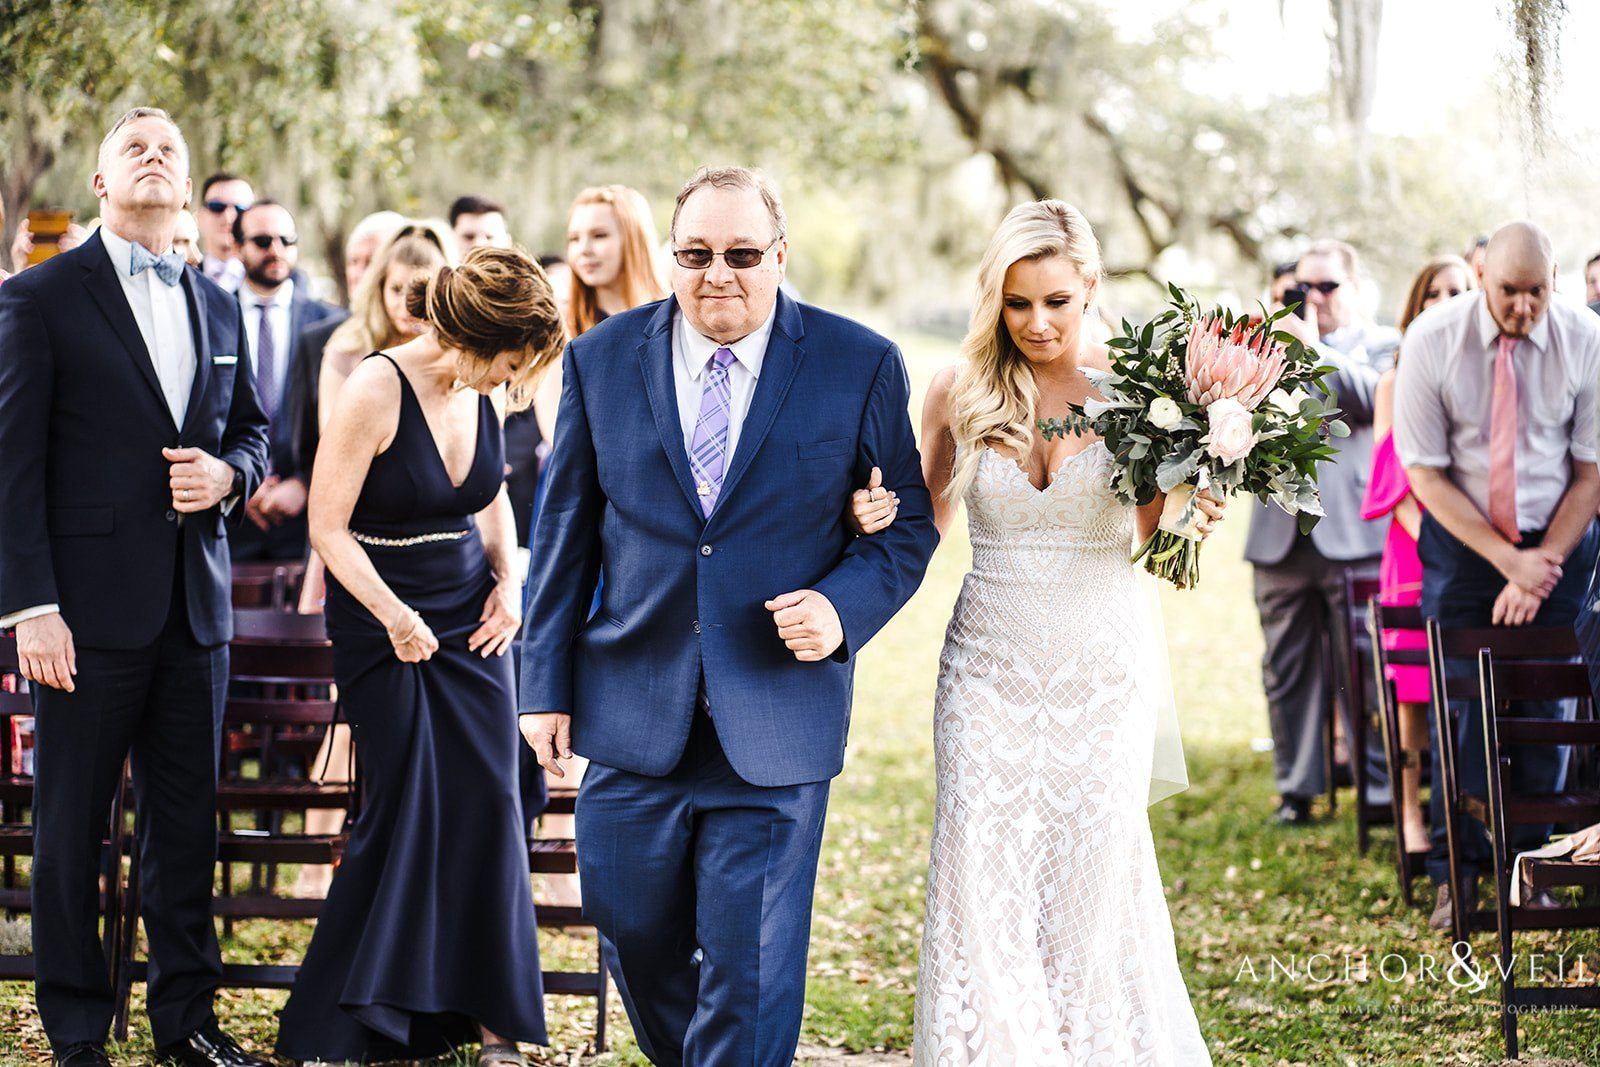 The bride walking down the aisle with her father at the Boone Hall Plantation Wedding 